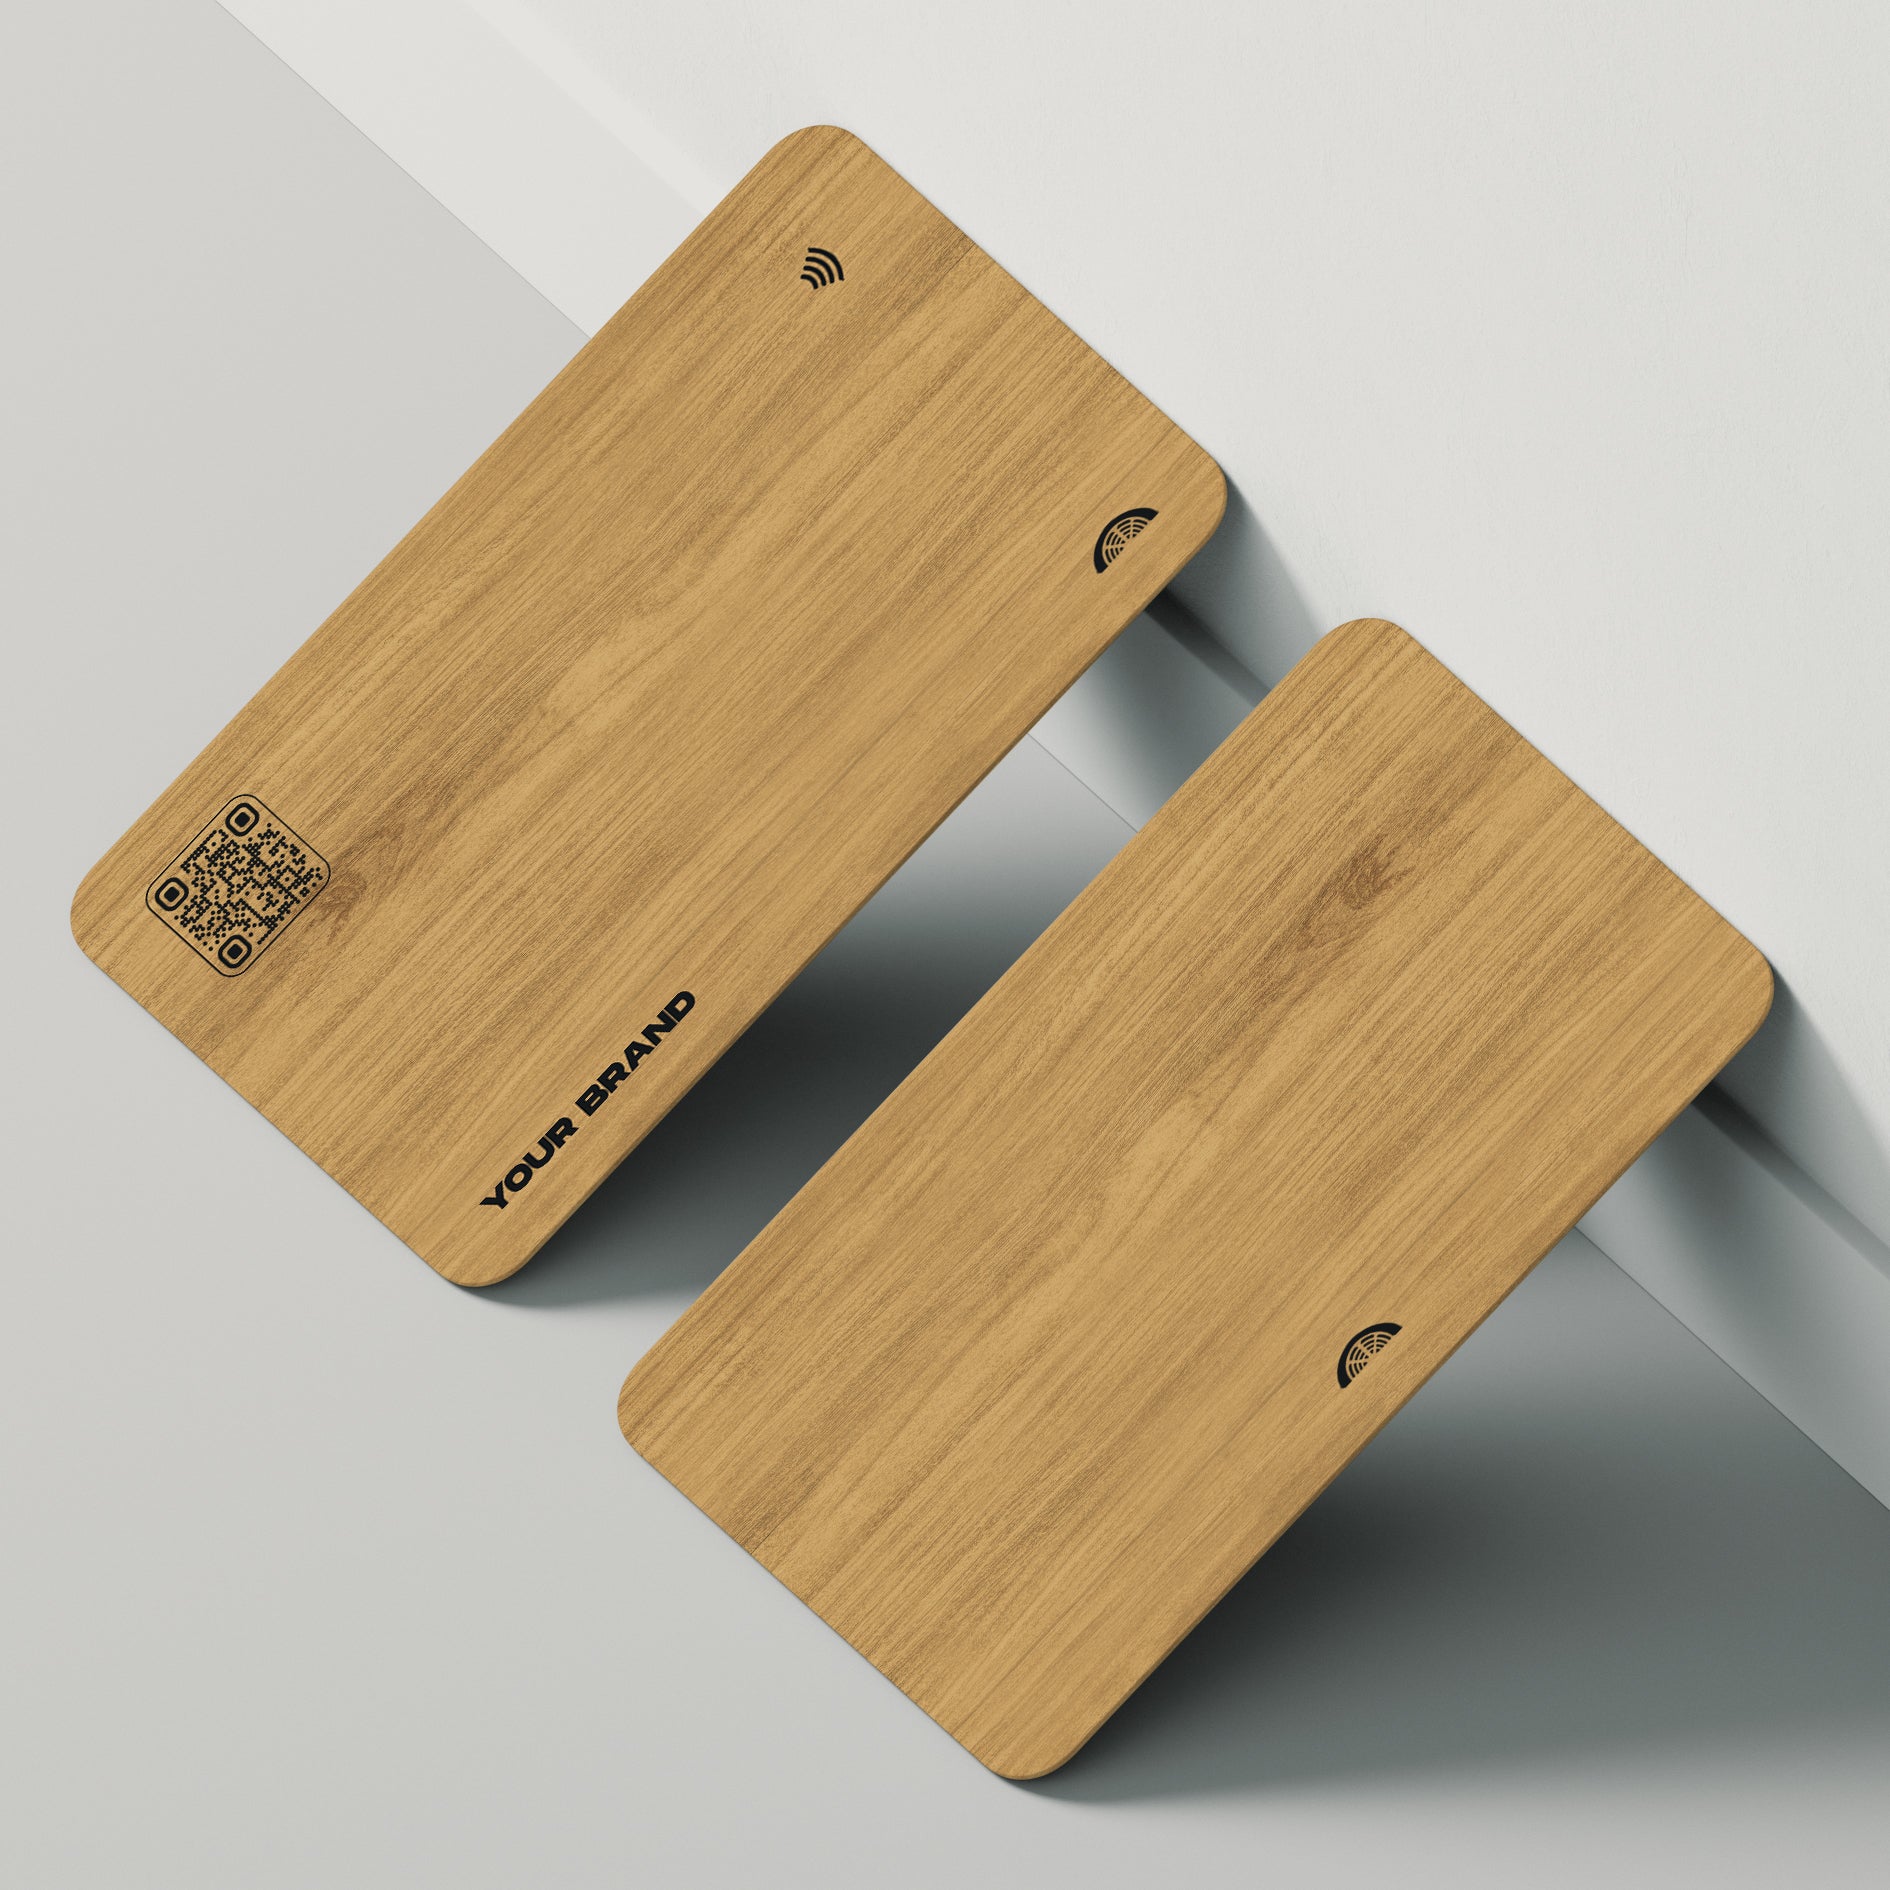 Two NFC-enabled business cards stacked atop one another, made of sustainable bamboo